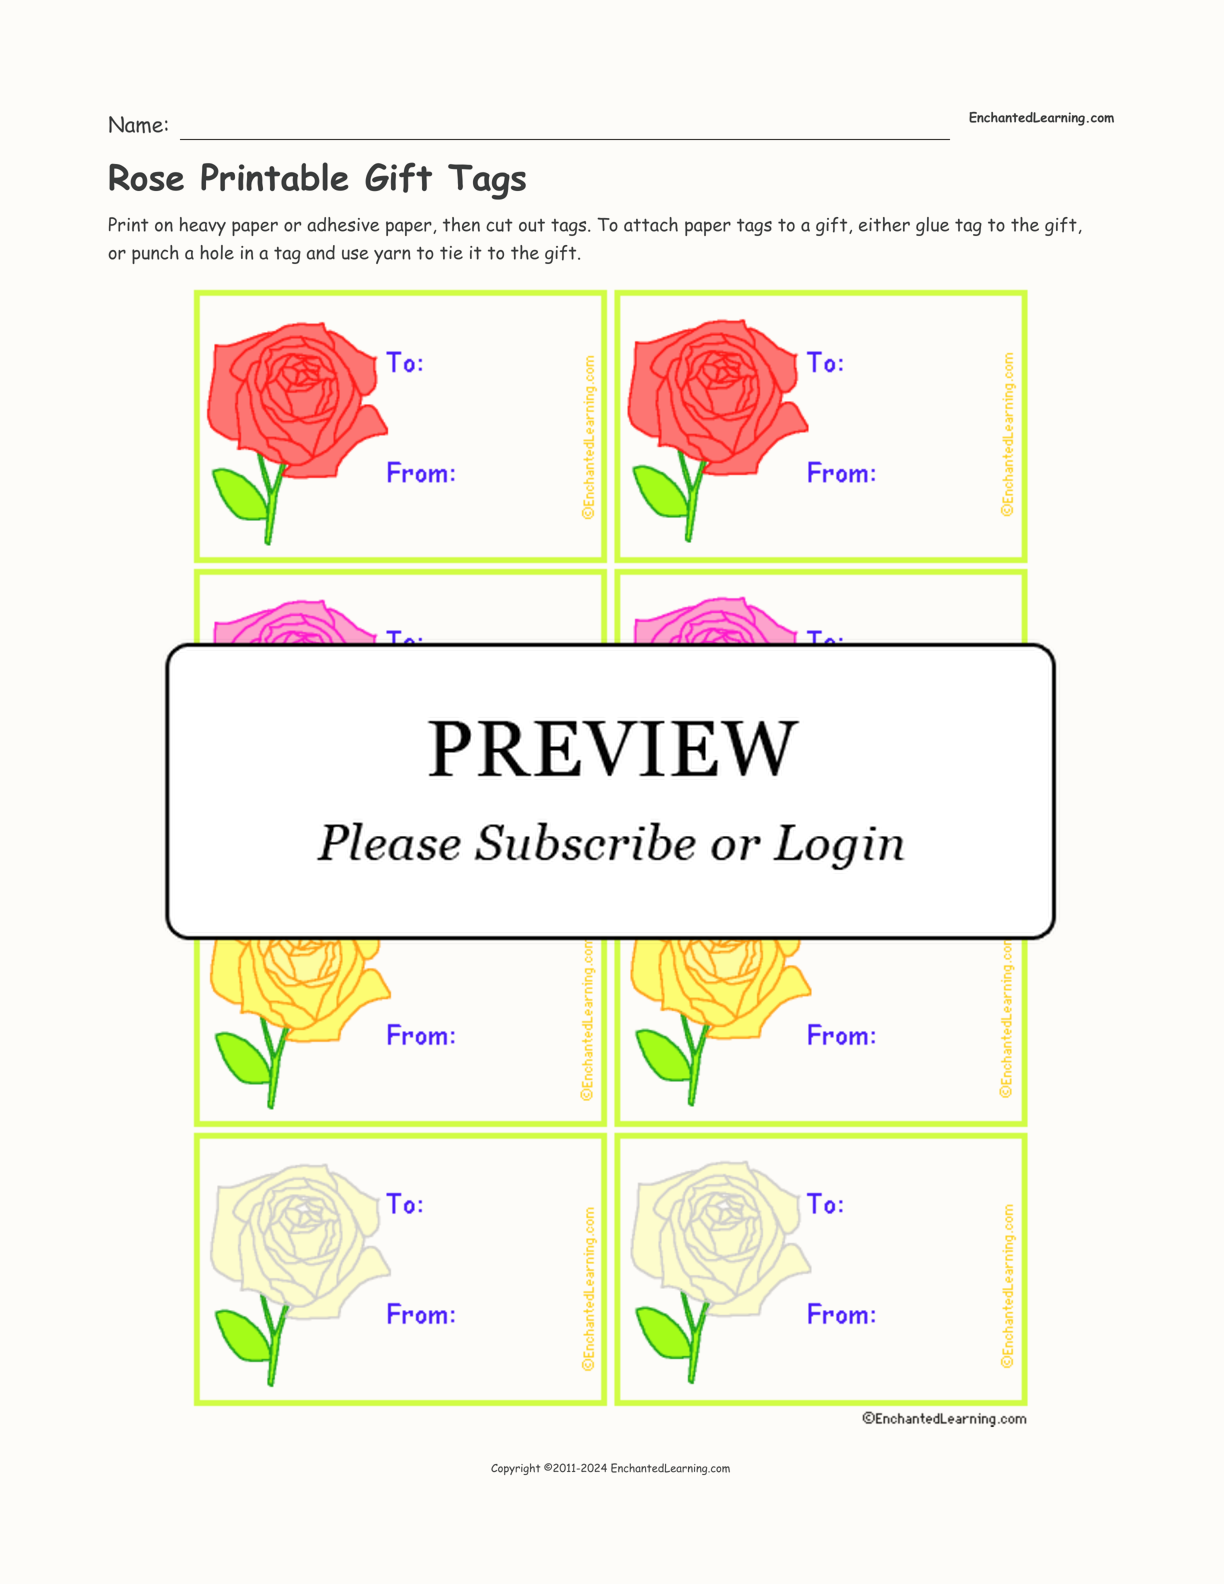 Rose Printable Gift Tags interactive printout page 1